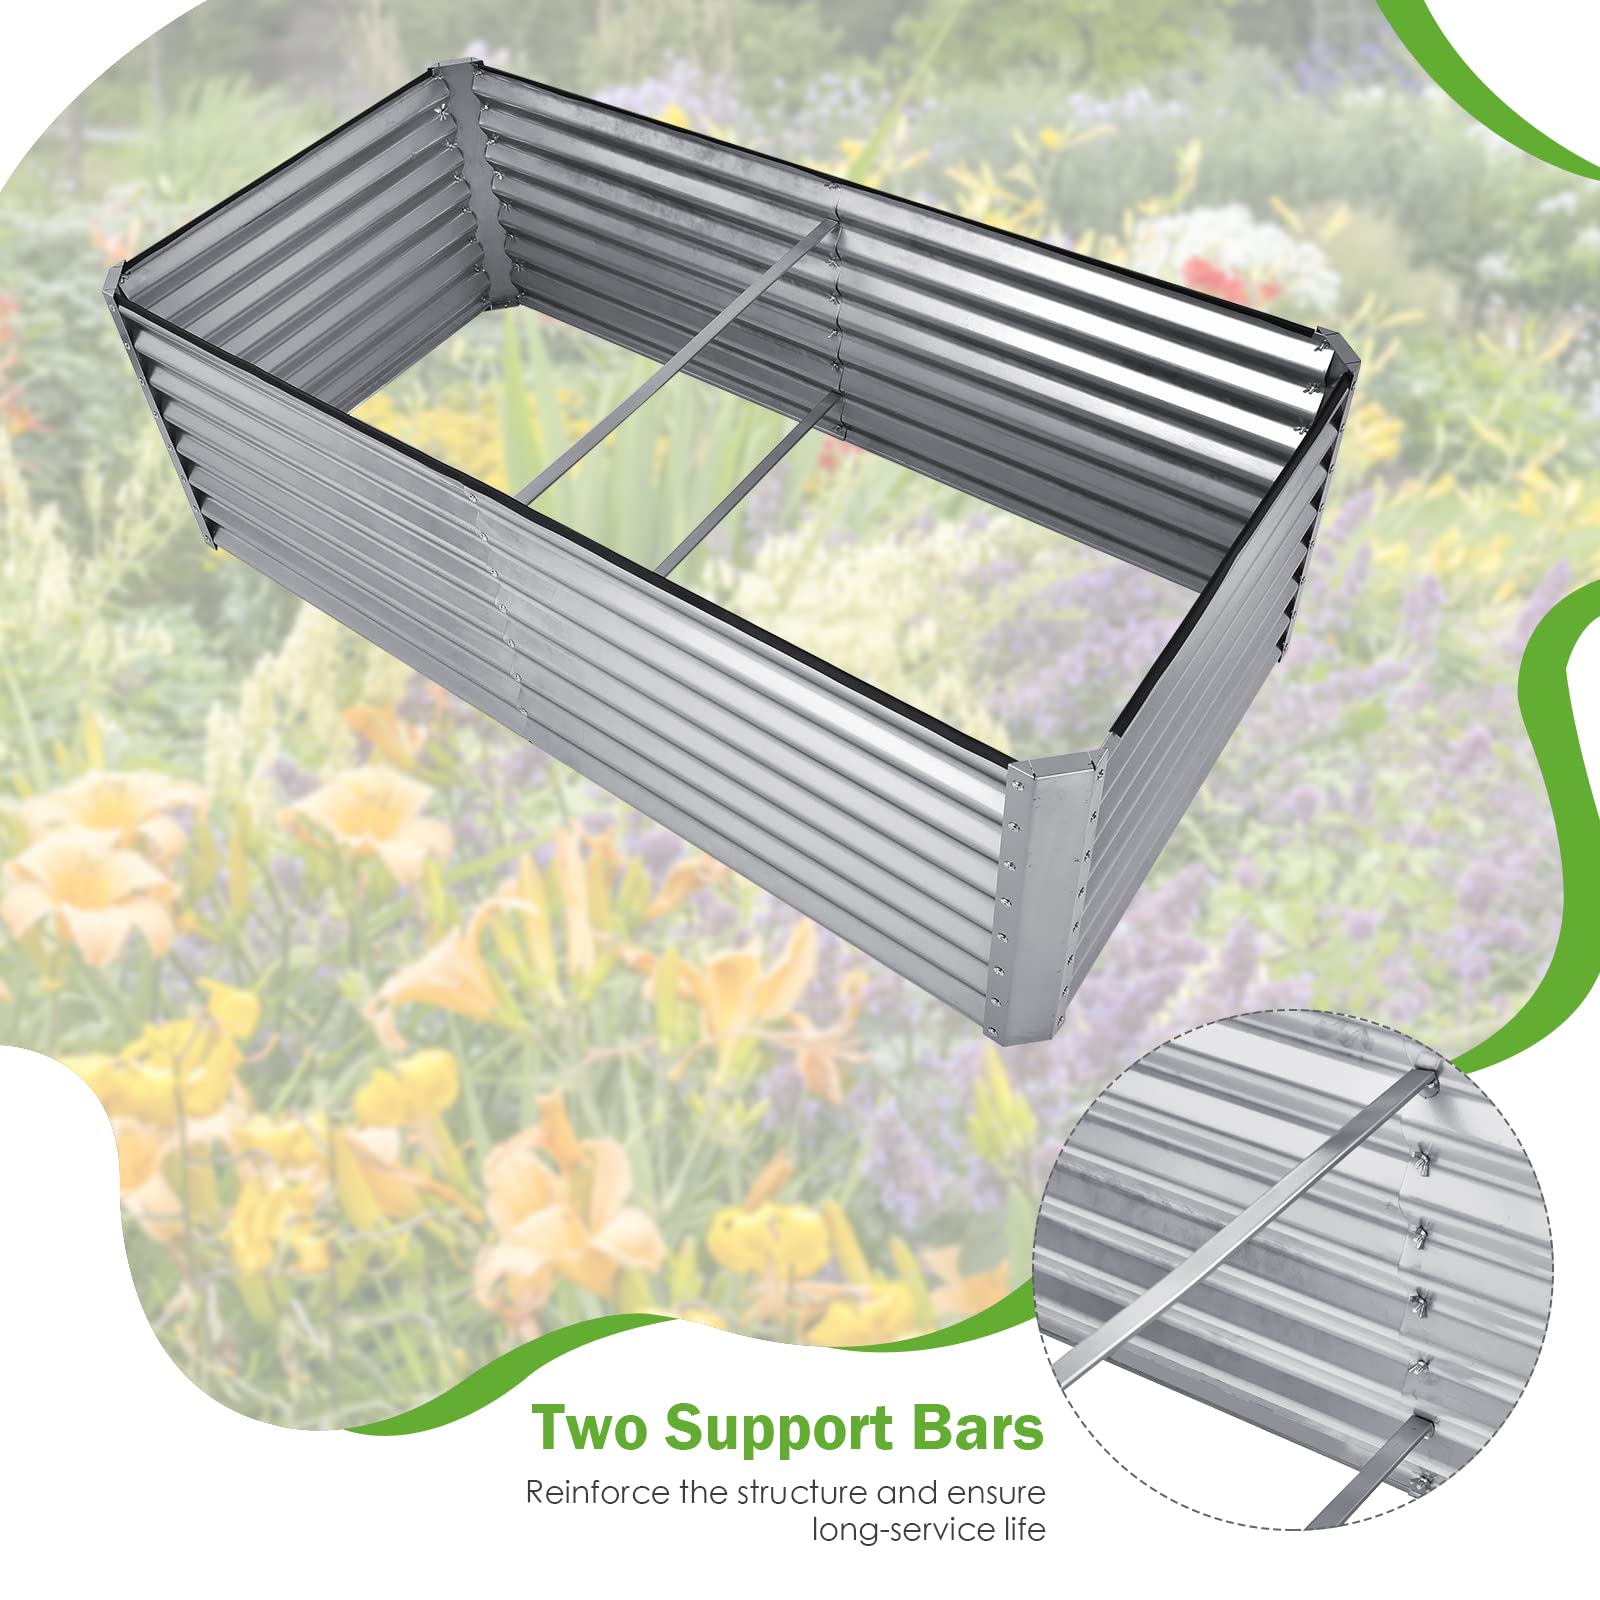 Giantex 6x3x2ft Steel Planter Raised Bed, Protective Edges, 4 Ground Stakes, Vegetables, Flowers Fruit Herb